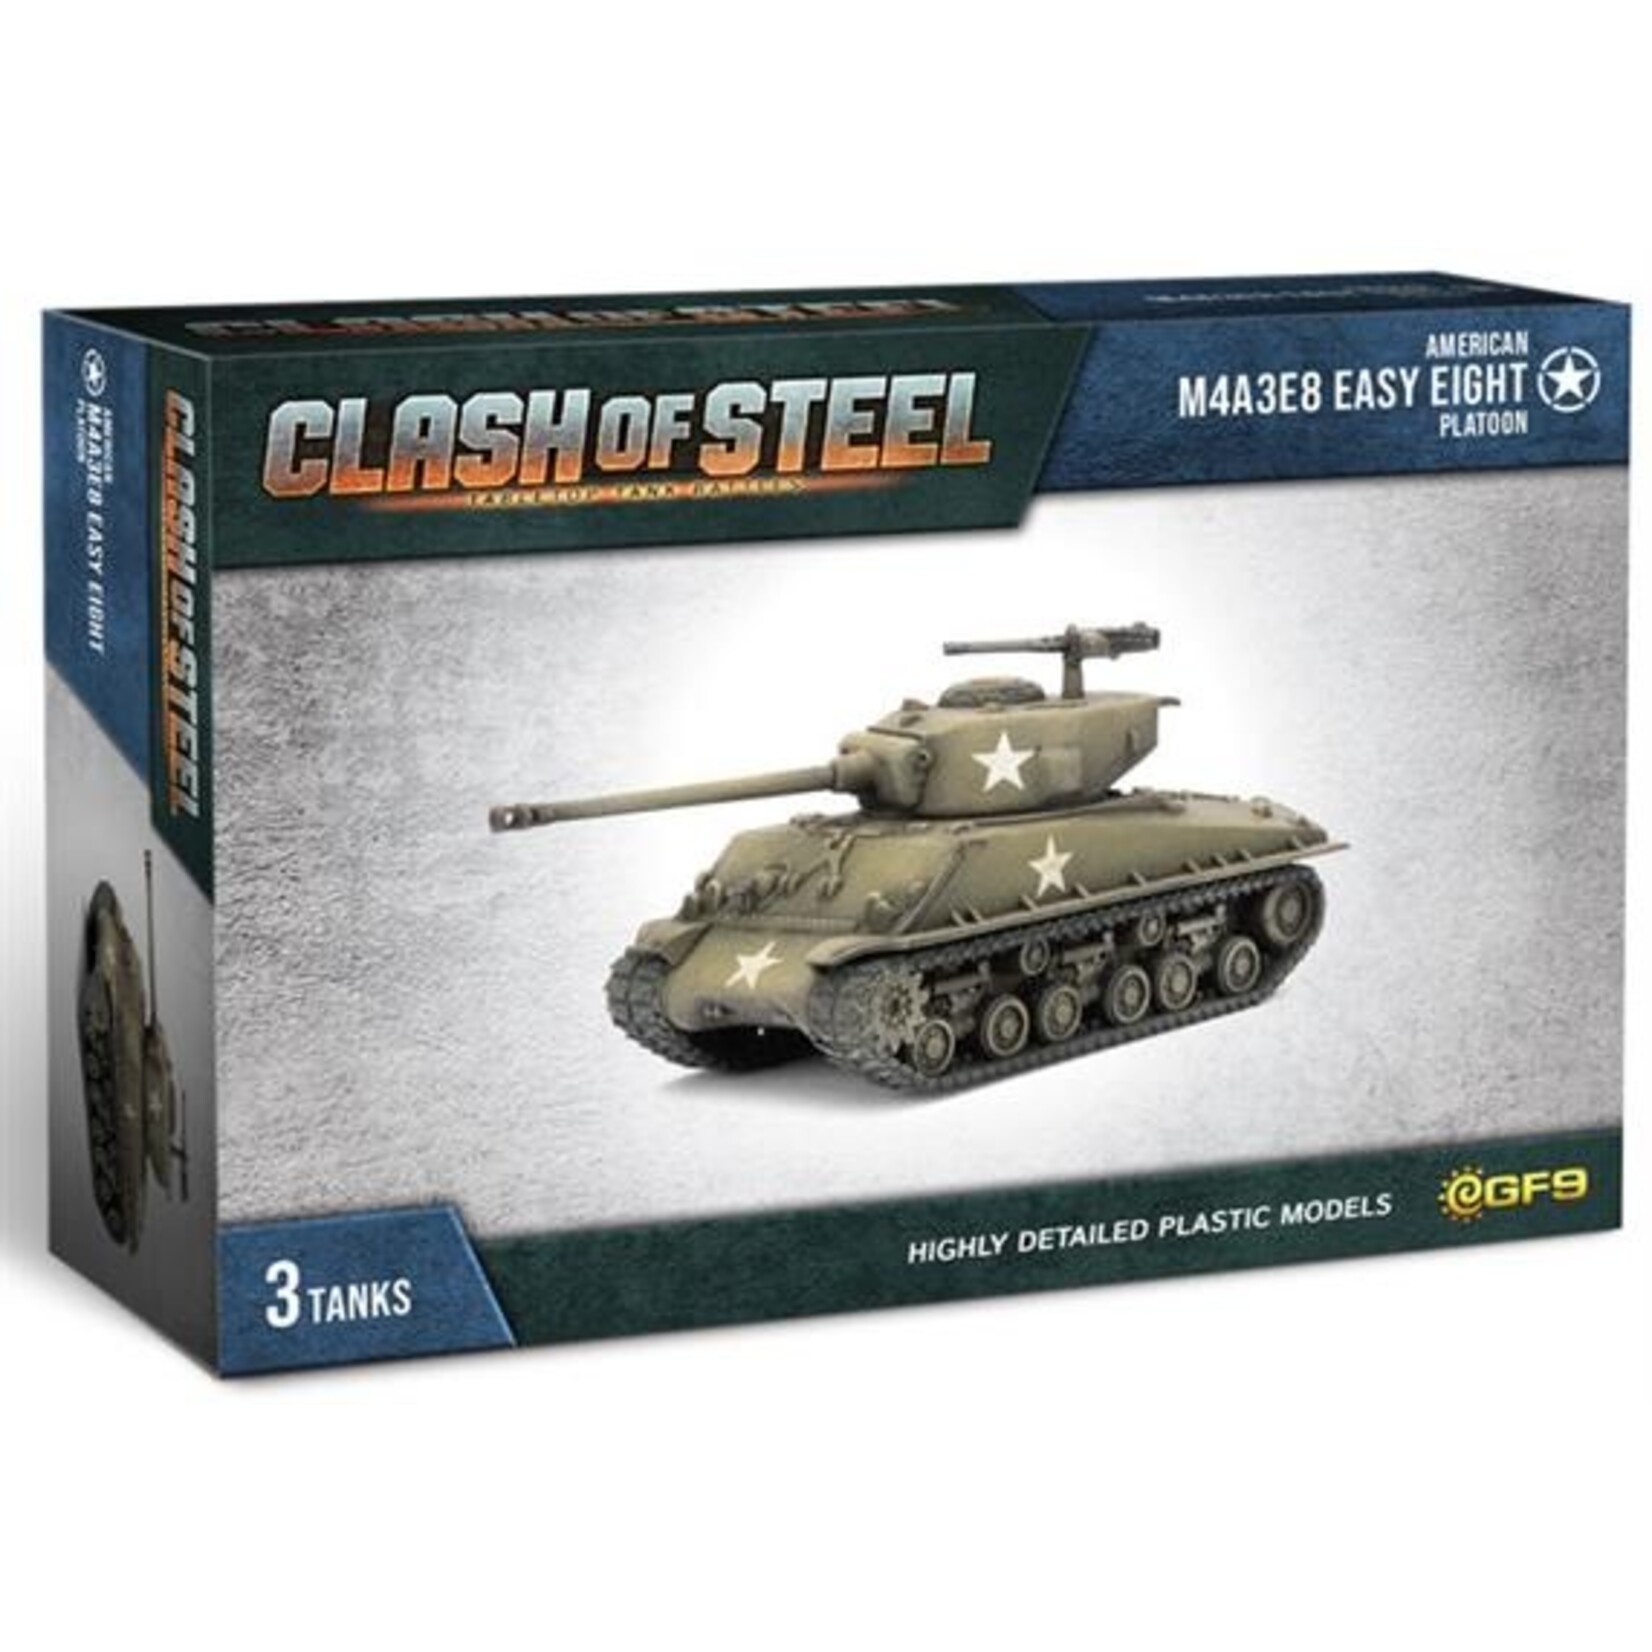 Clash Of Steel American M4A3E8 Easy Eight Platoon